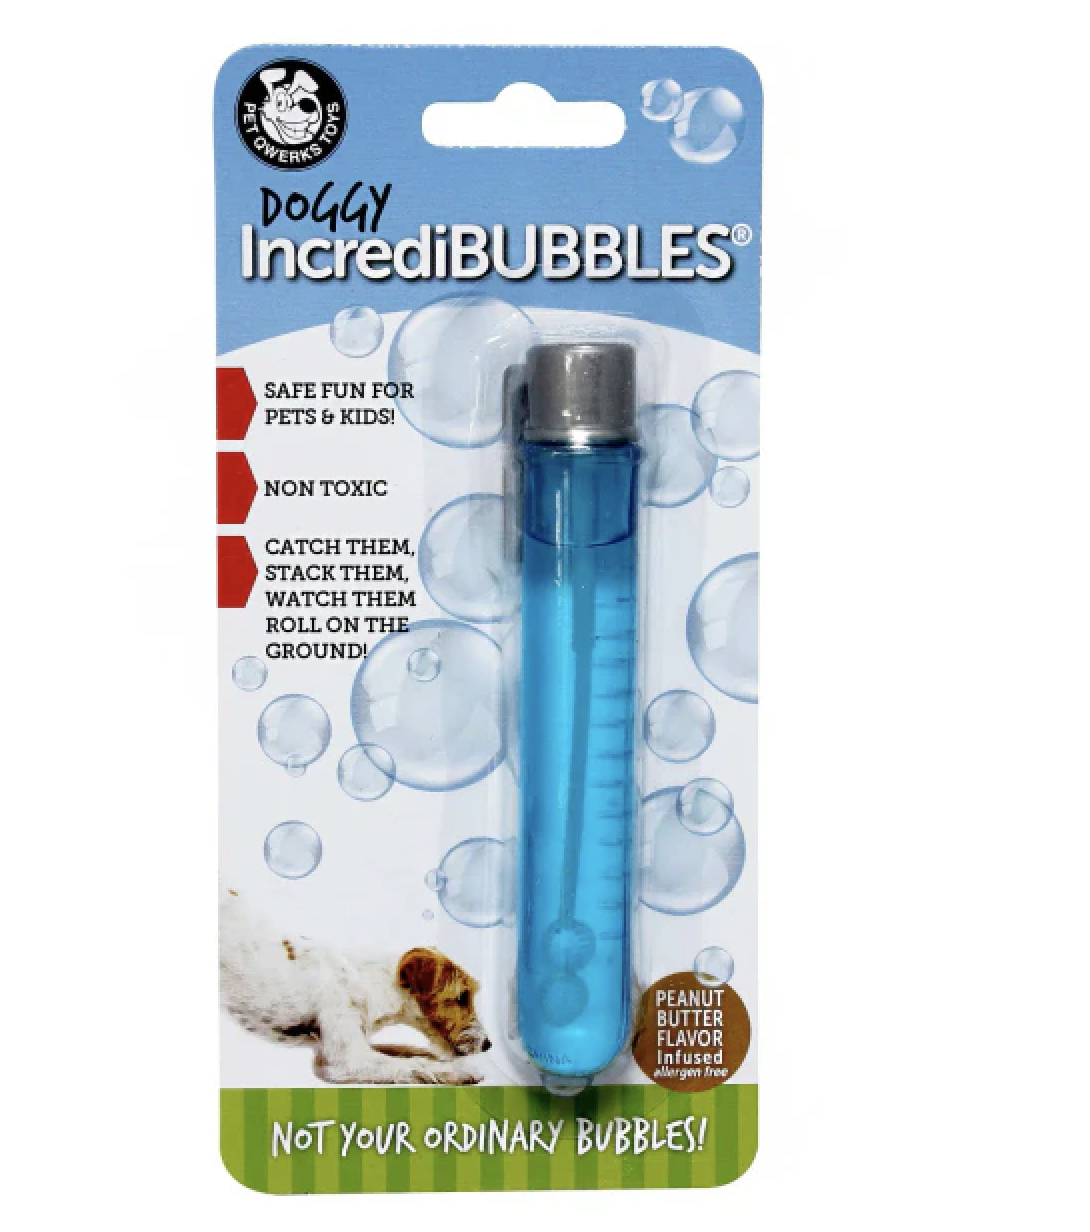 PetQwerks Doggy IncrediBubbles Interactive Dog Toy Peanut Butter 25ml